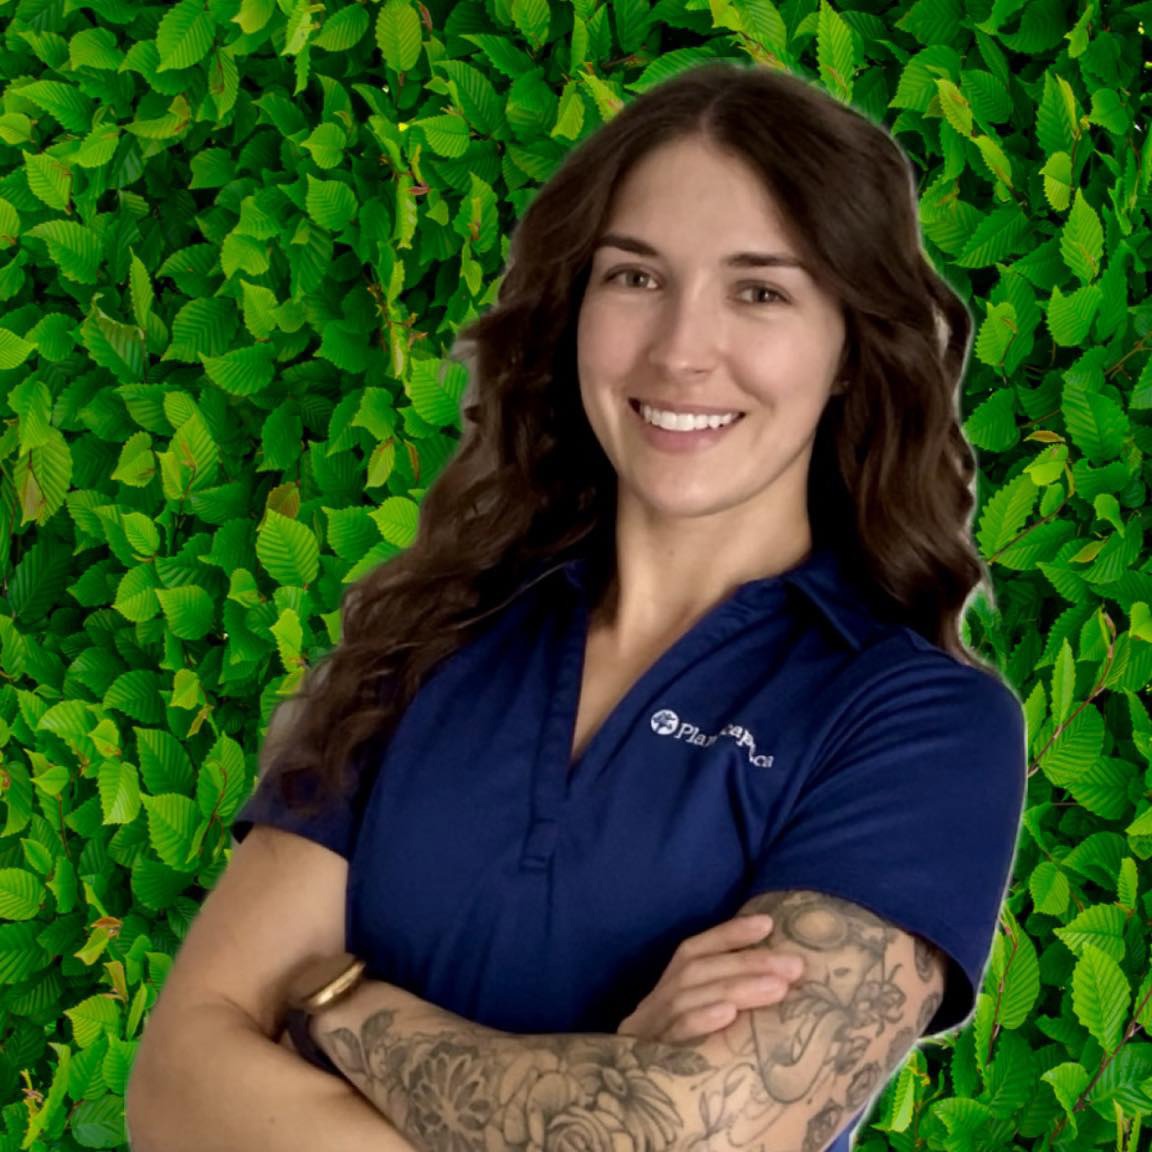 A person with long hair and a tattooed arm smiles, wearing a blue shirt against a green leafy backdrop. They appear friendly and professional.